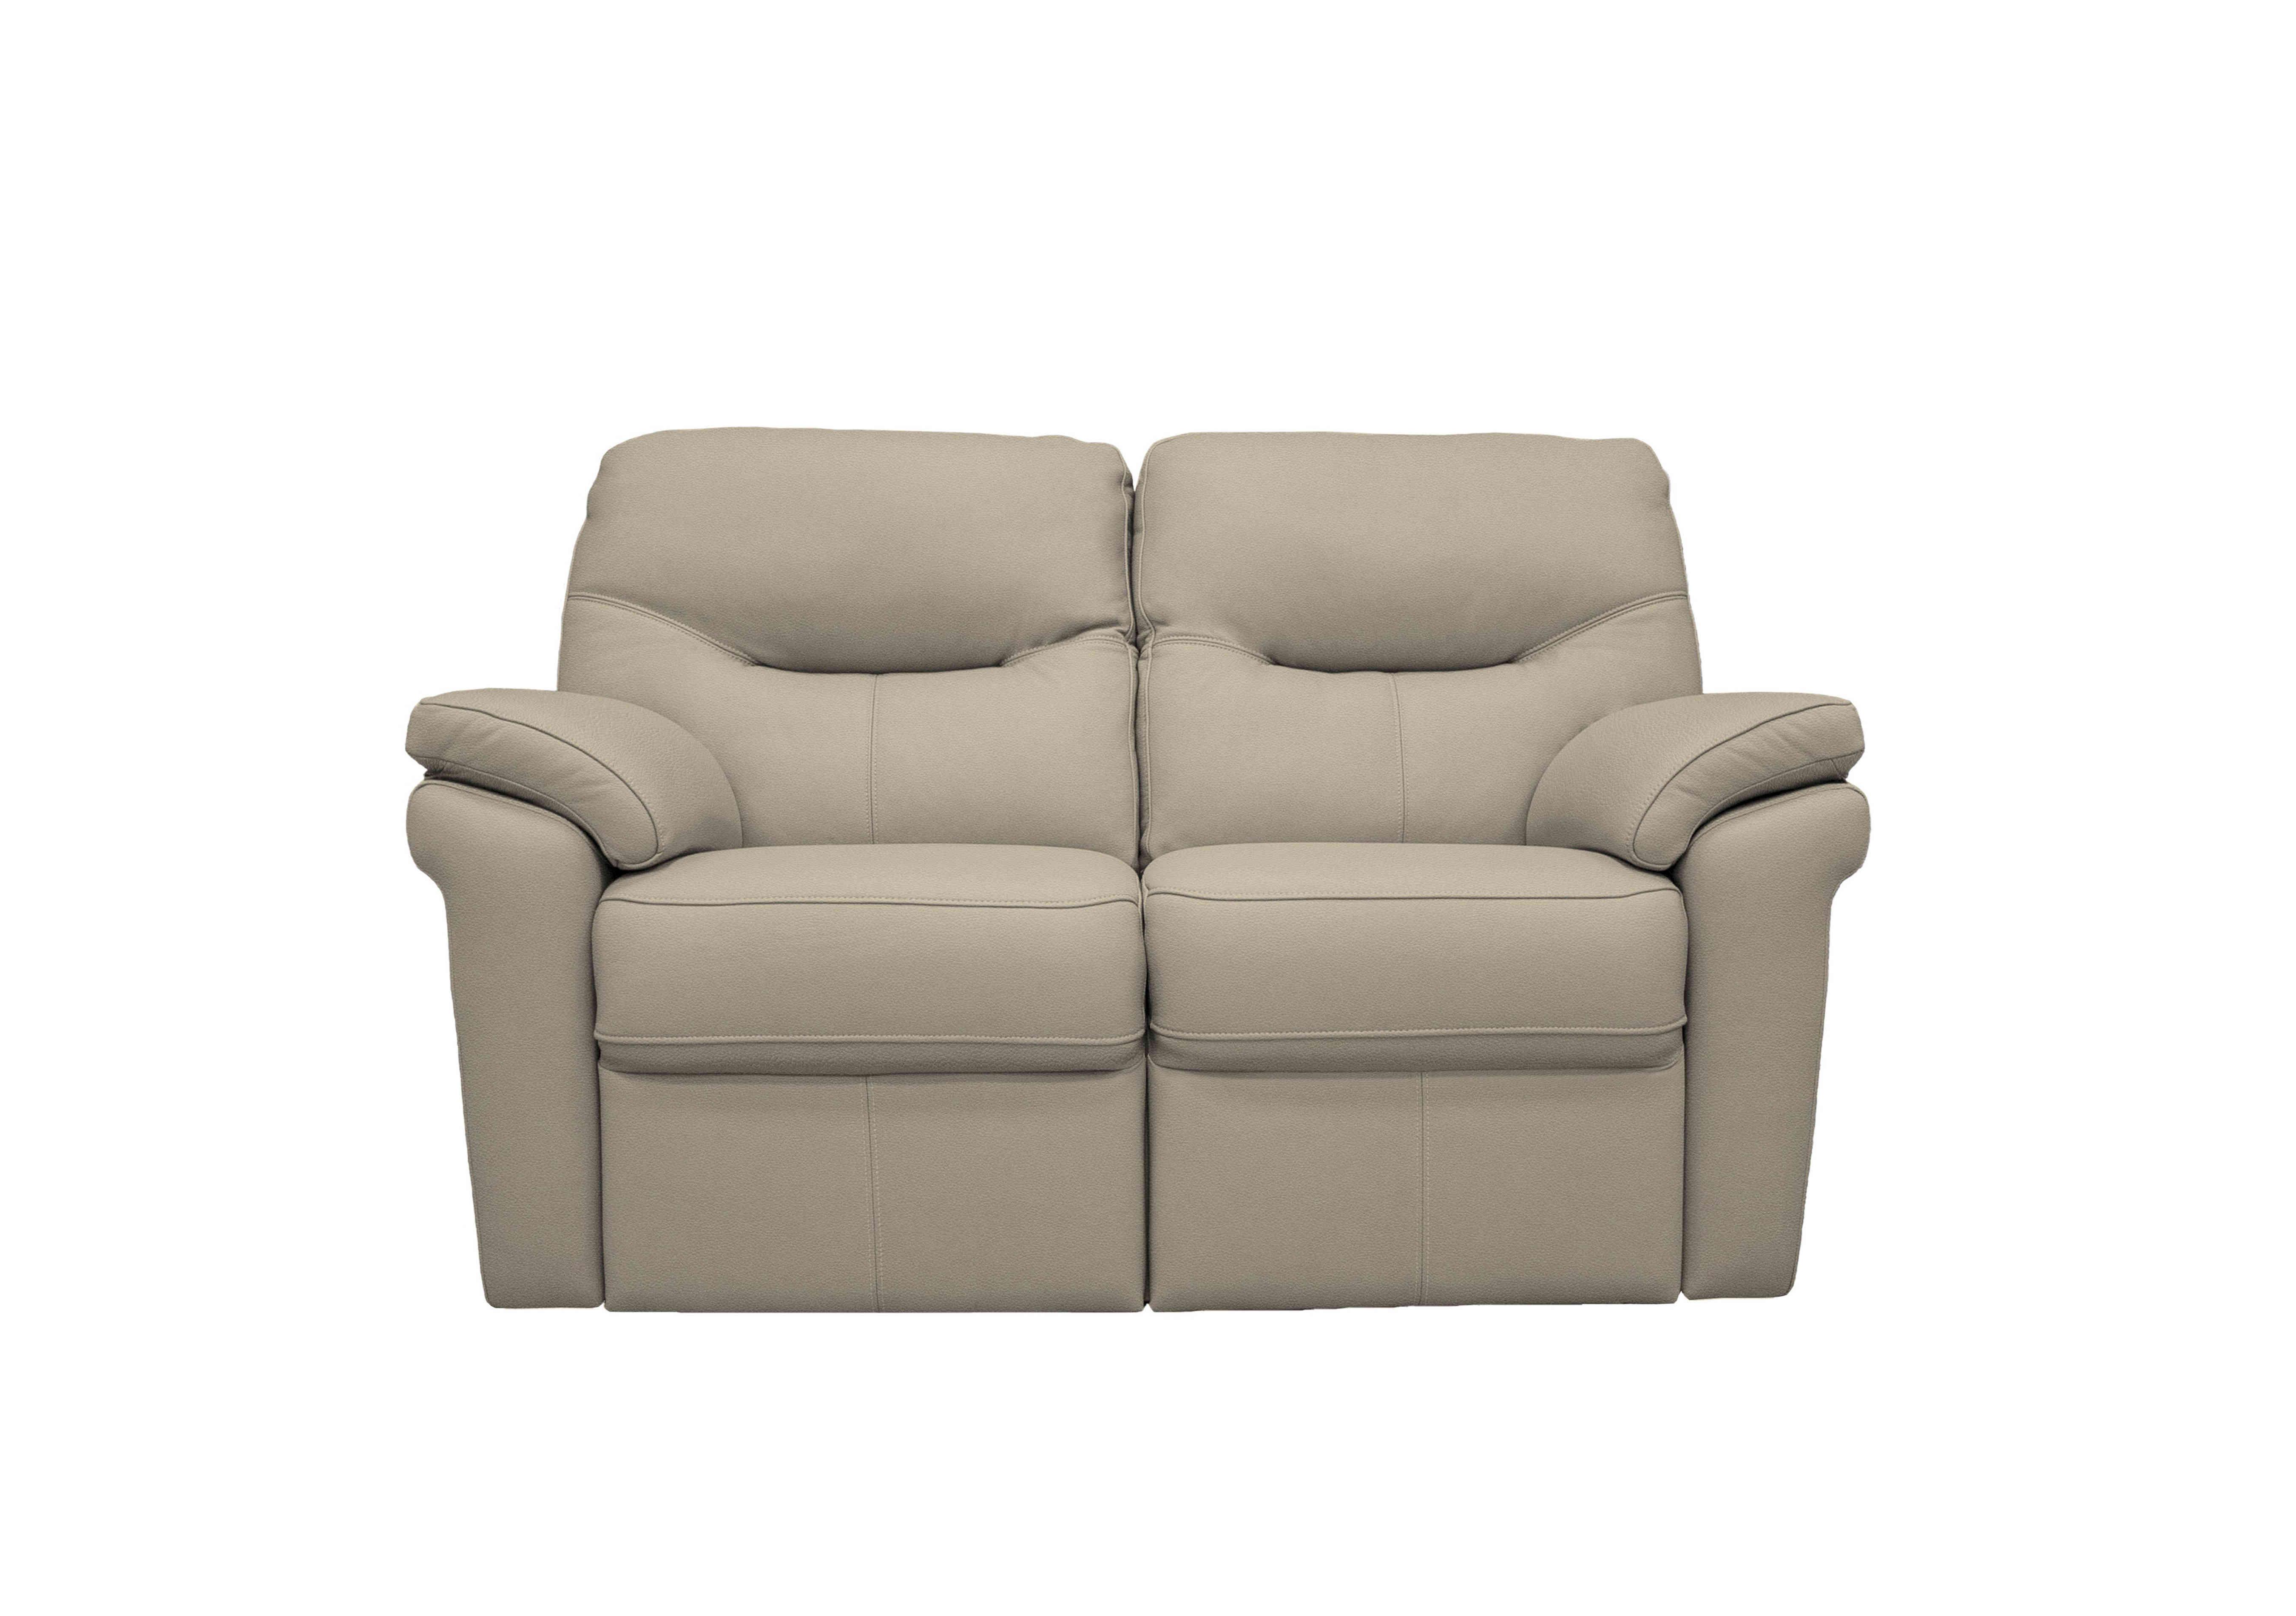 Seattle 2 Seater Leather Sofa in H001 Oxford Mushroom on Furniture Village